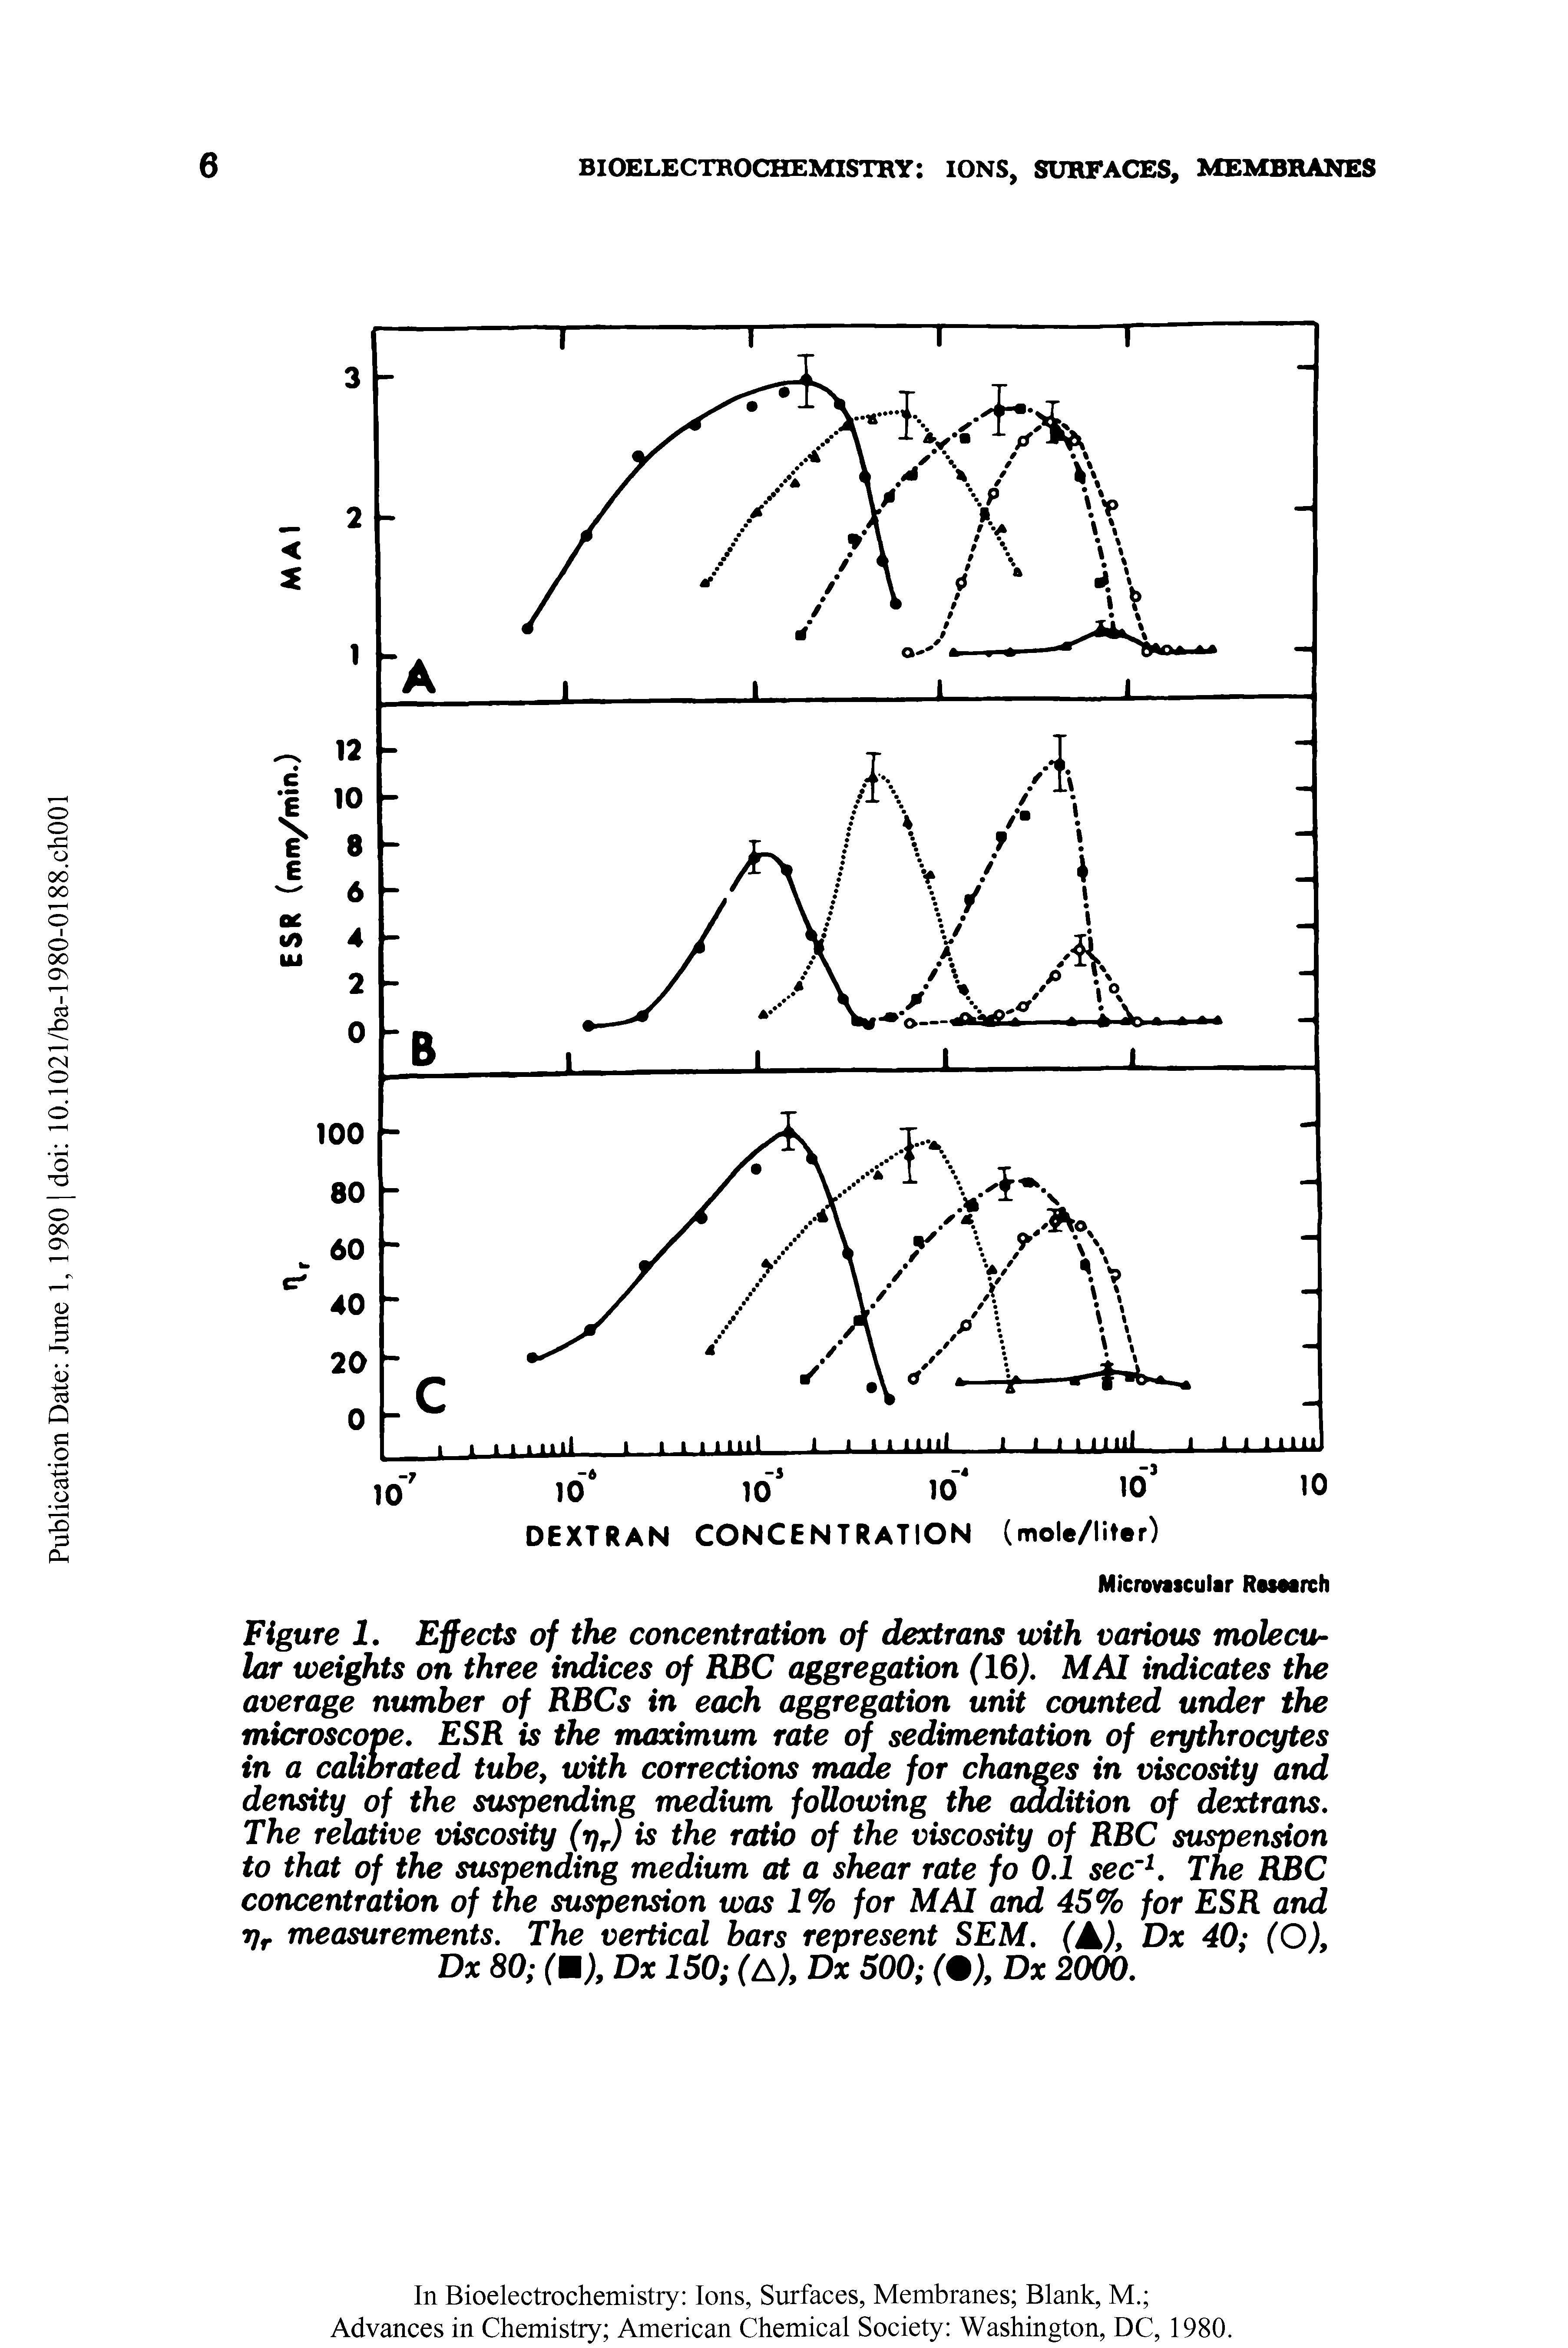 Figure 1. Effects of the concentration of dextrans with various molecular weights on three indices of BBC aggregation (16). MAI indicates the average number of RBCs in each aggregation unit counted under the microscope. ESR is the maximum rate of sedimentation of erythrocytes in a calibrated tube, with corrections made for changes in viscosity and density of the suspending medium following the addition of dextrans. The relative viscosity (t)r) is the ratio of the viscosity of RBC suspension to that of the suspending medium at a shear rate fo 0.1 sec 1. The RBC concentration of the suspension was 1% for MAI and 45% for ESR and r)r measurements. The vertical bars represent SEM. (A), Dx 40 (O), Dx 80 (M), Dx 150 (A), Dx 500 ( ), Dx 2000.